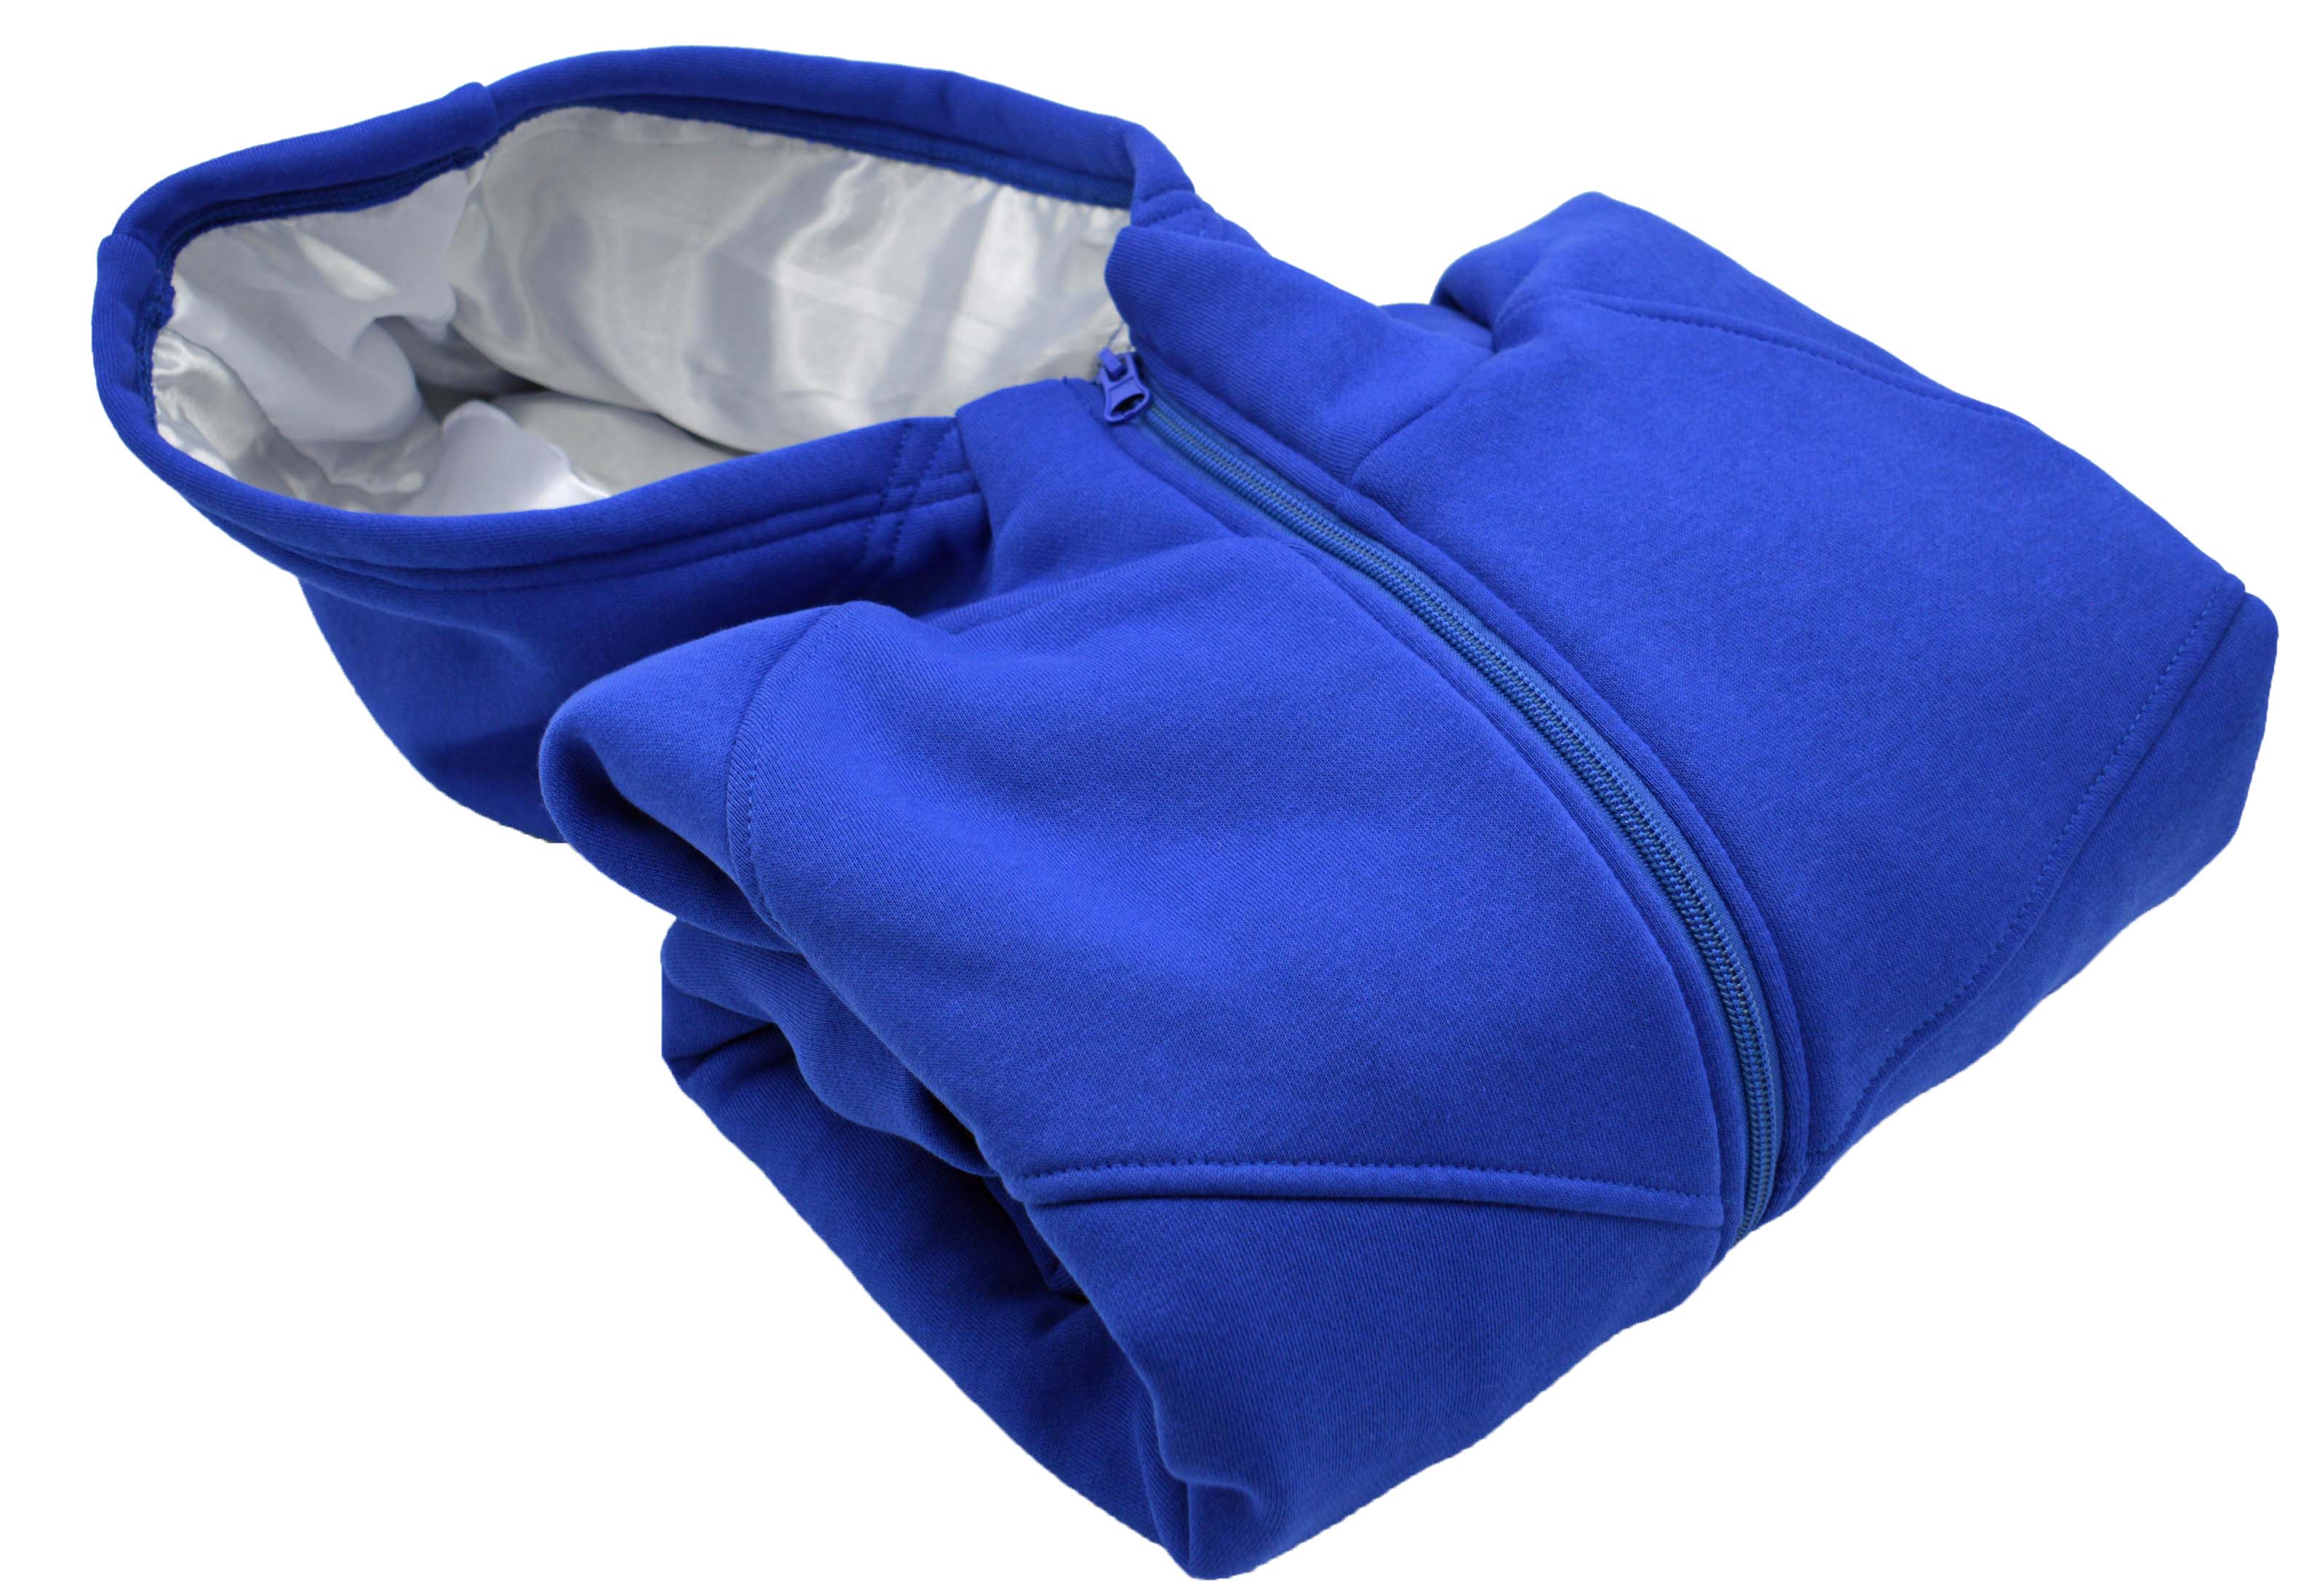 Women's Satin Lined Hoodie (Royal Blue and Pure White Satin